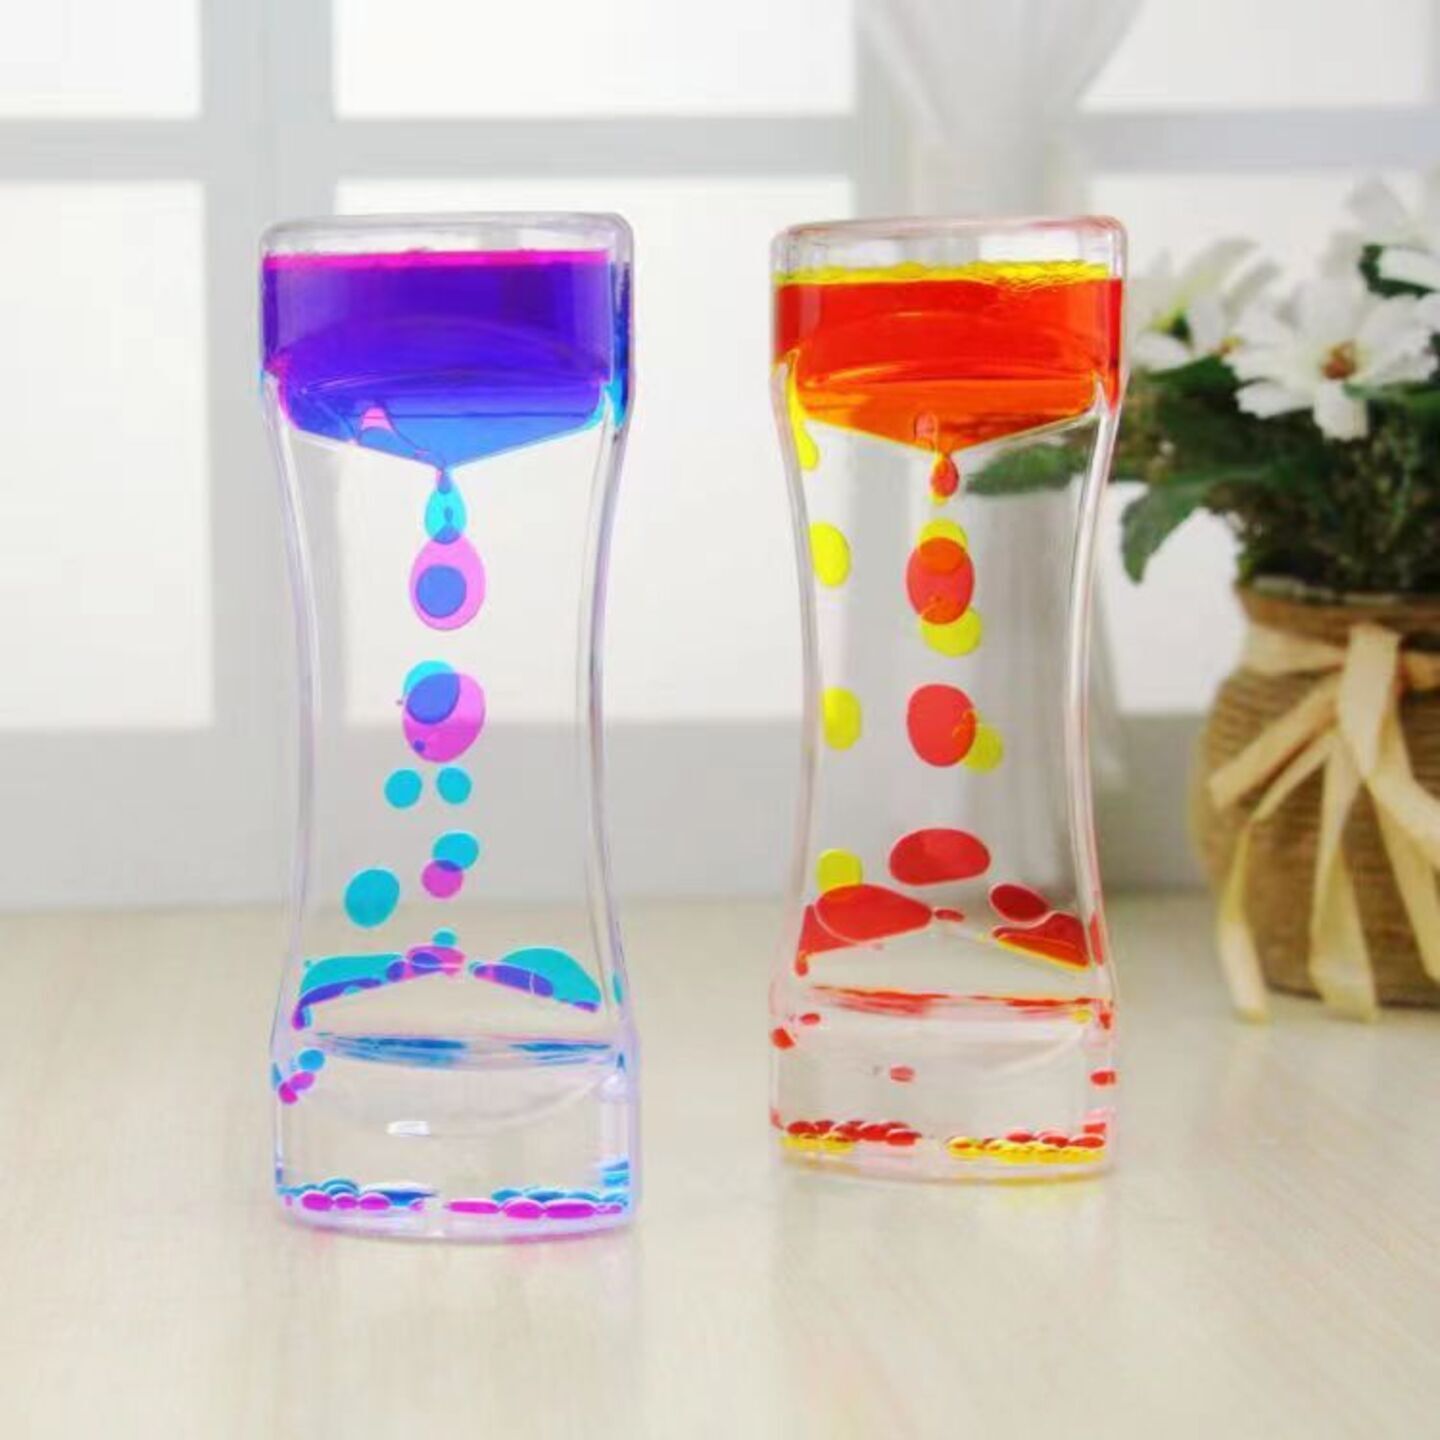 Rainbow Colourful Watery Hourglass Stress Reliever for Adults and Kids